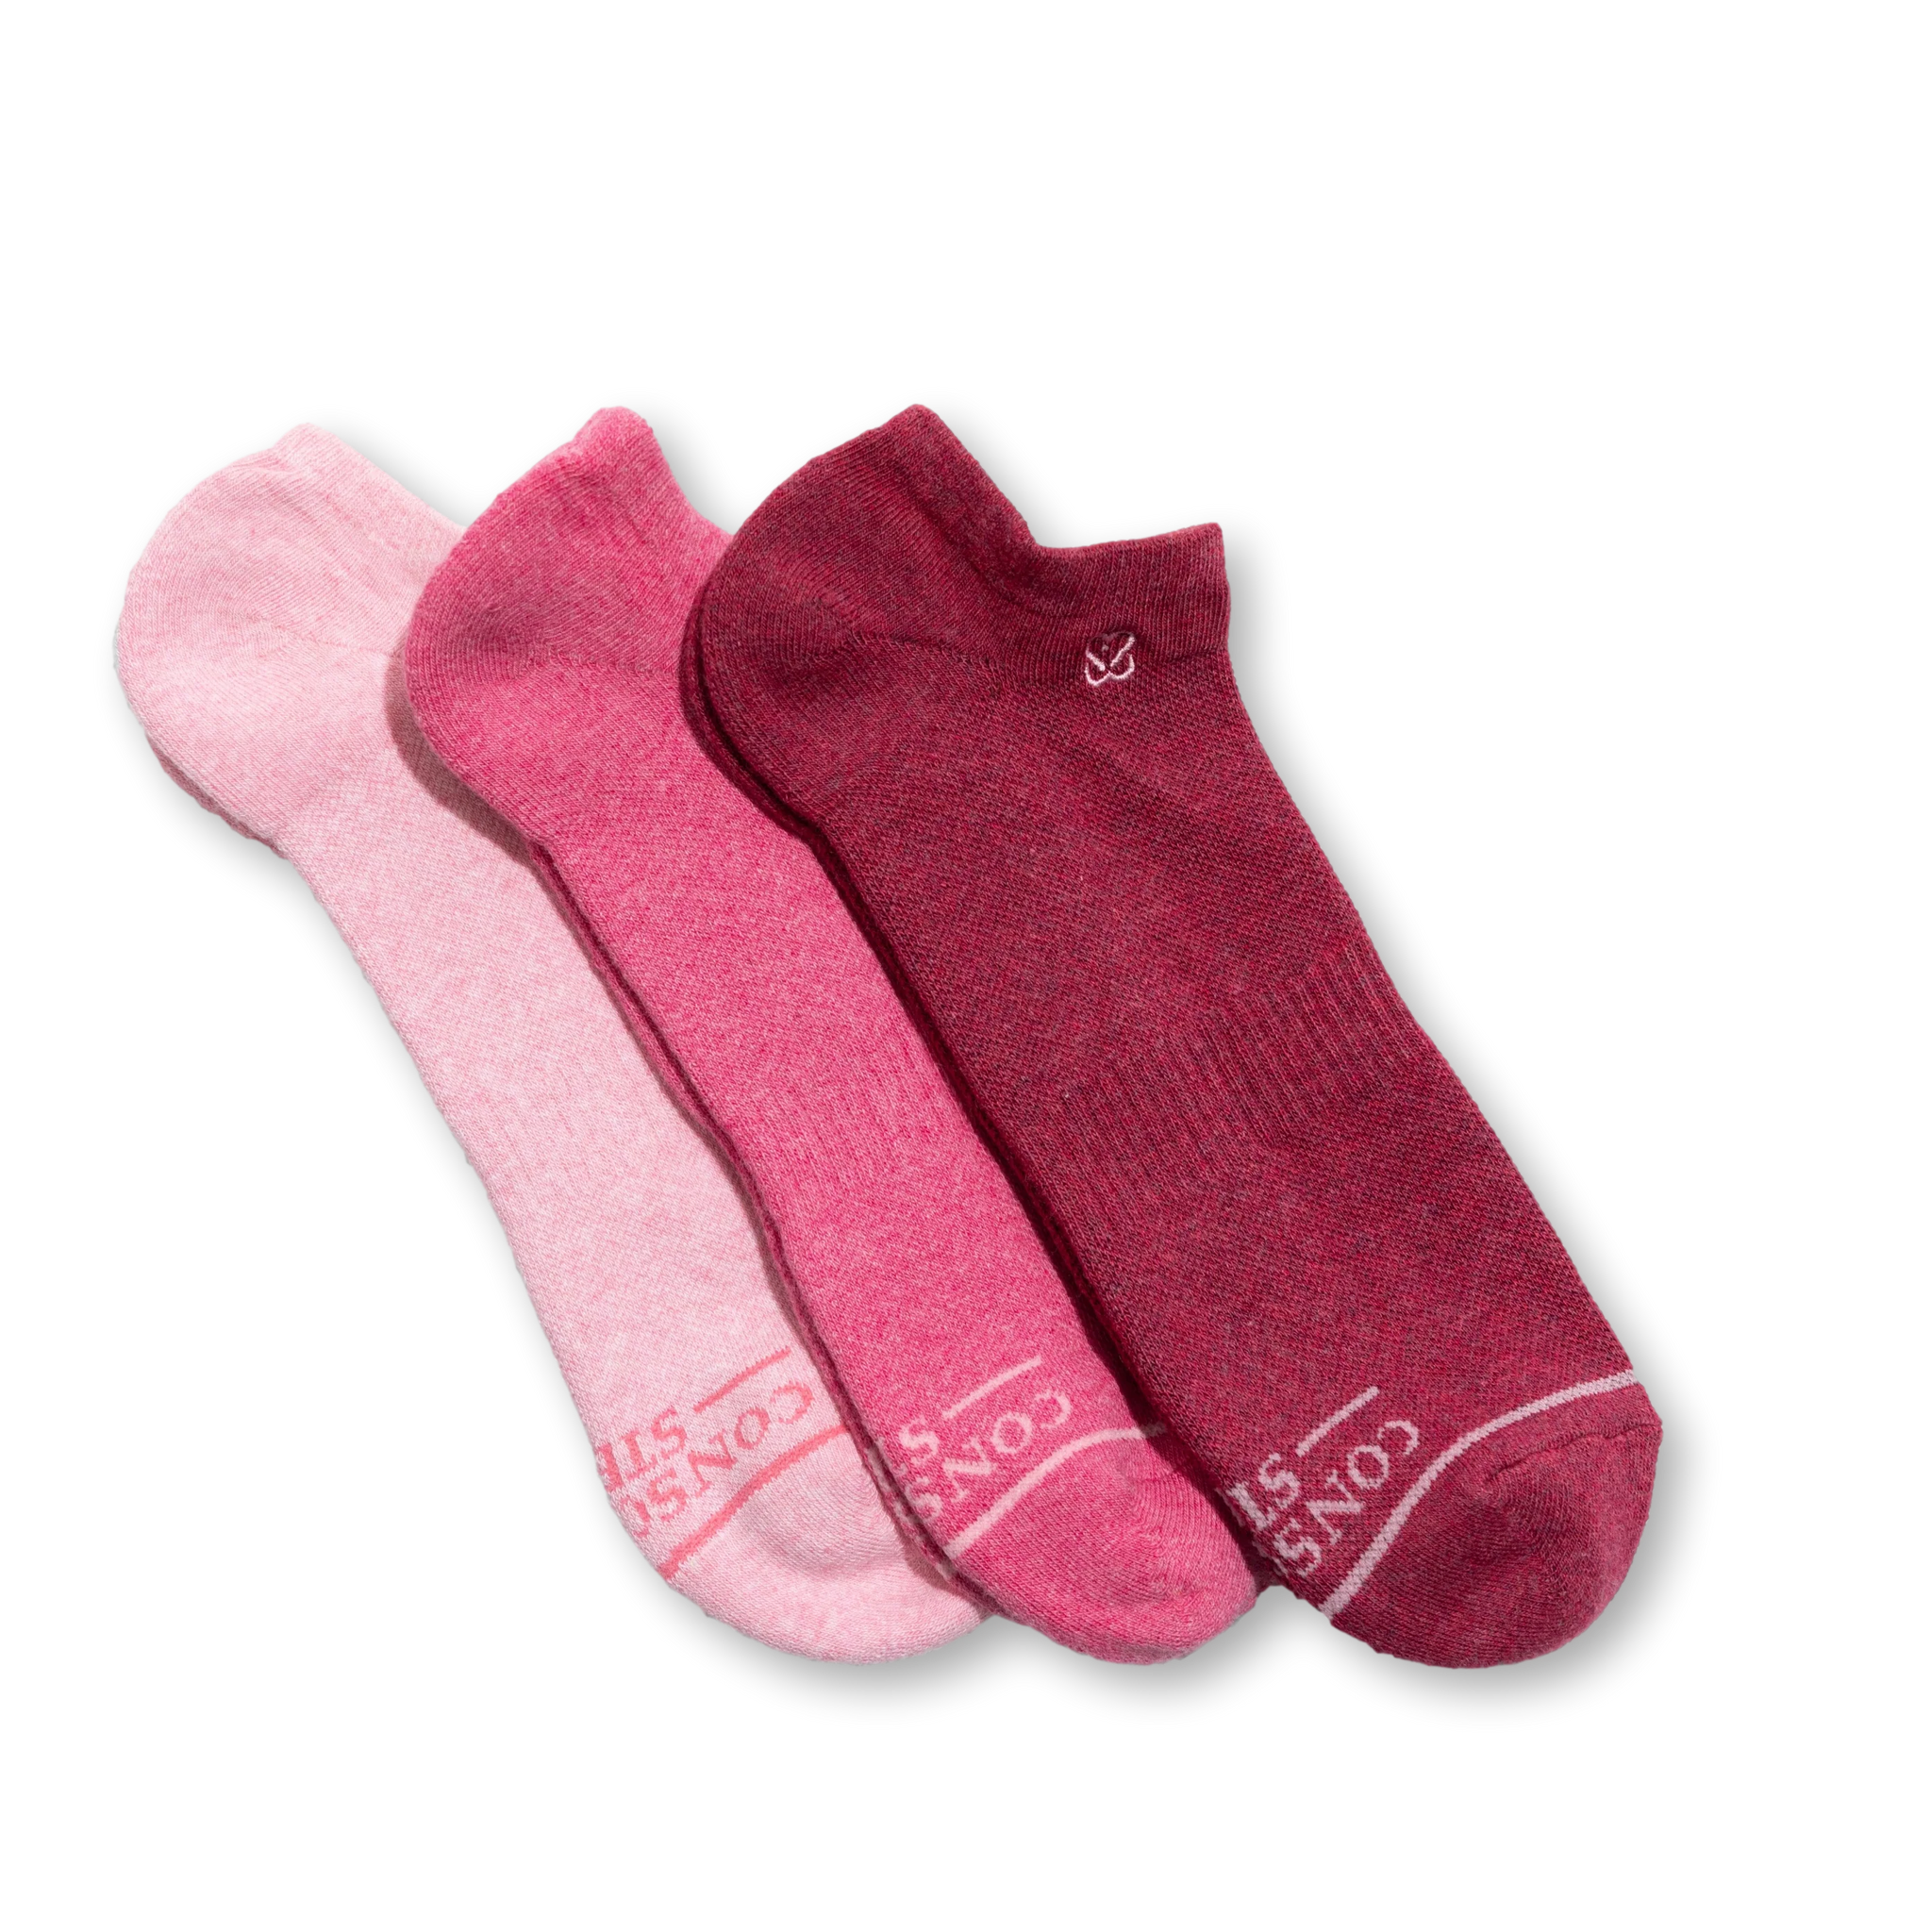 Socks That Promote Prevention of Breast Cancer Ankle Collection - India